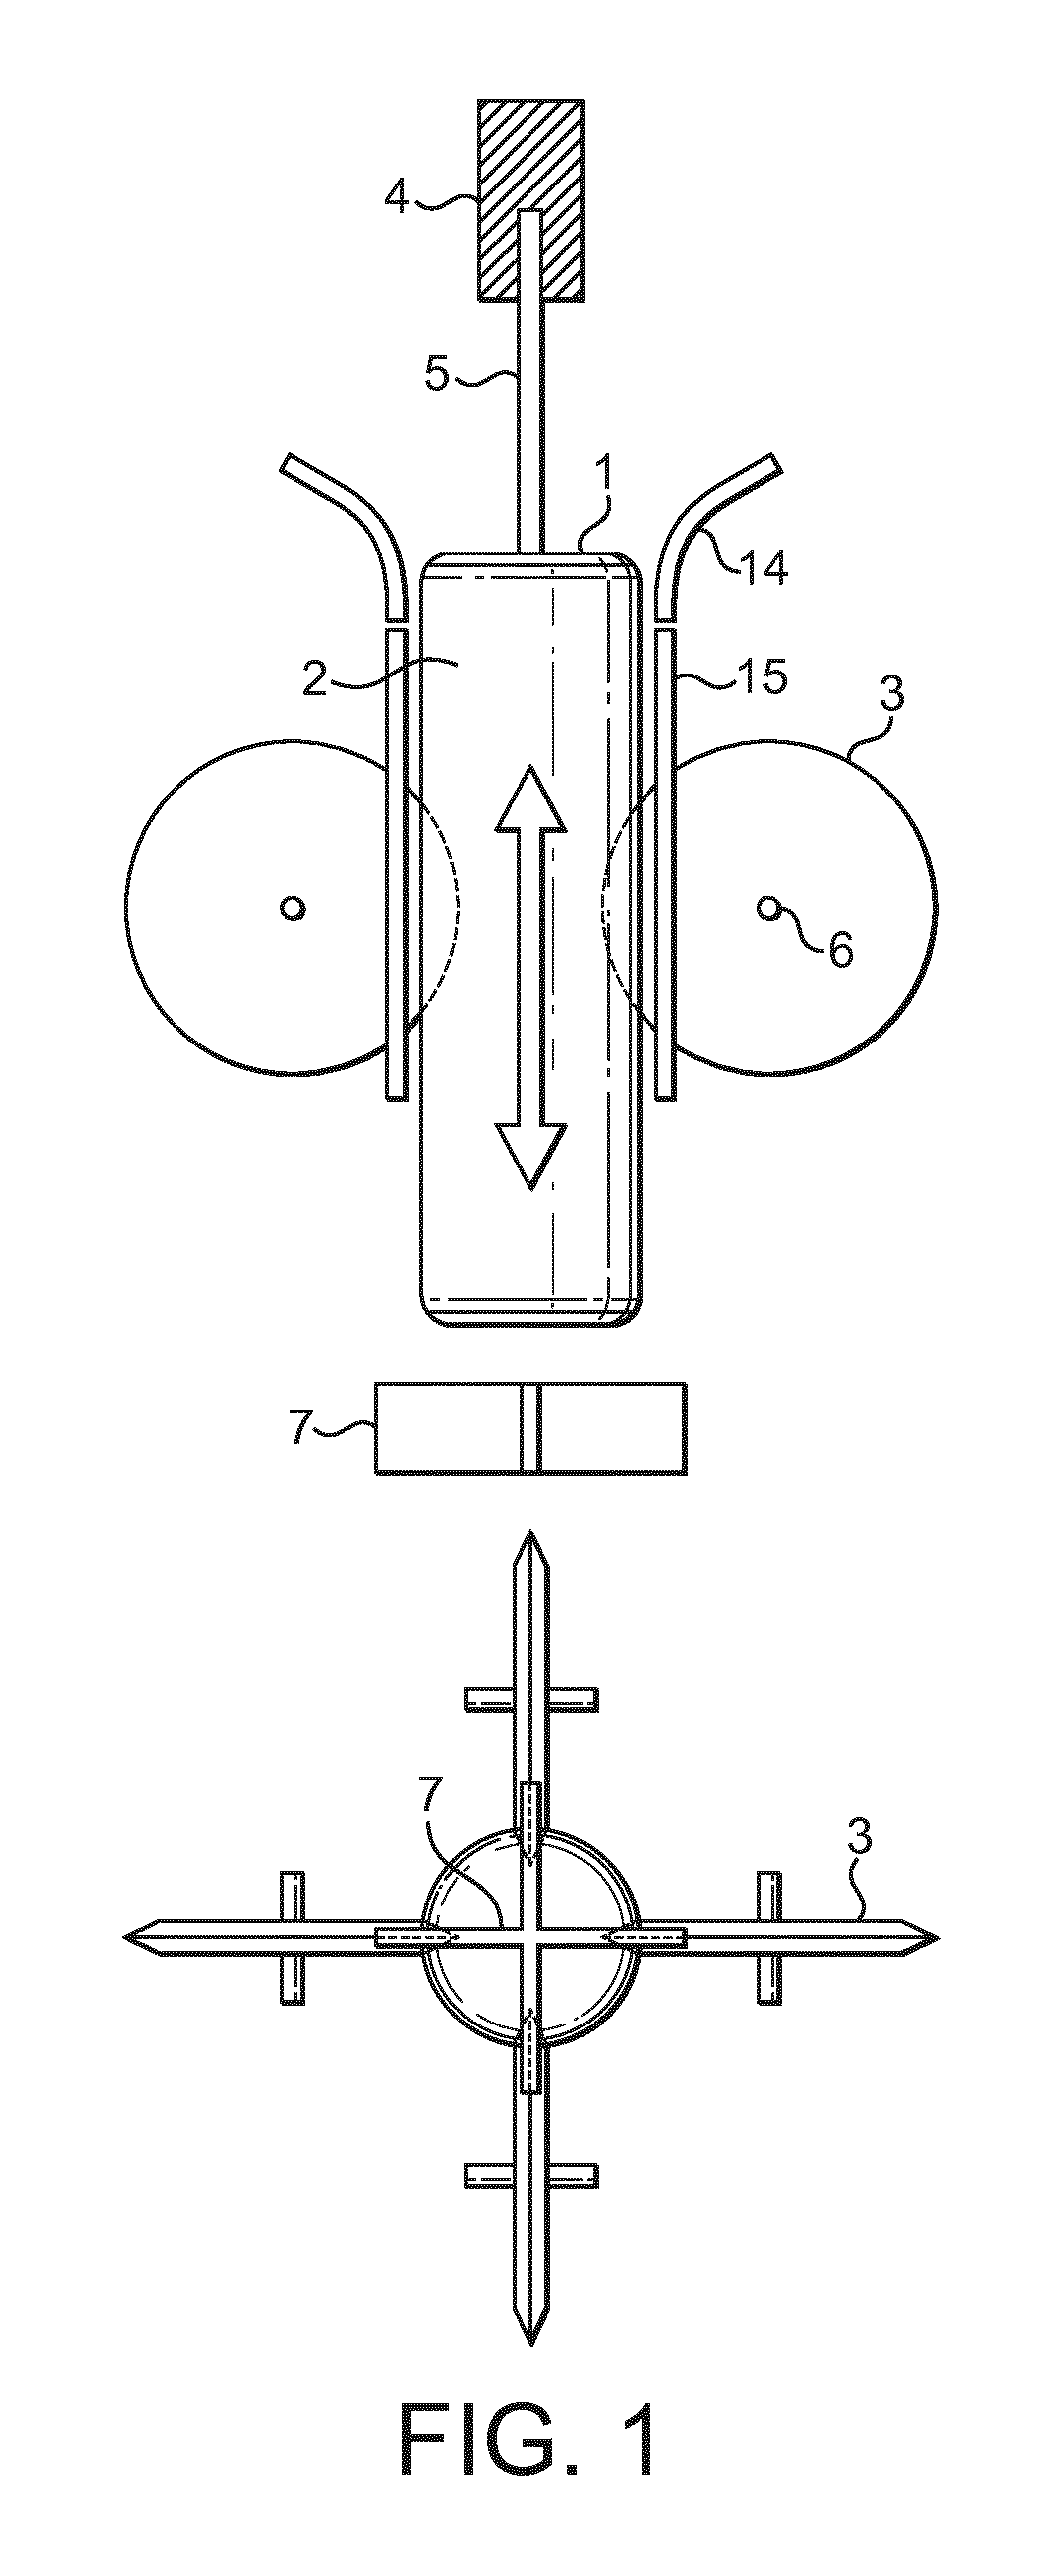 Apparatus and method for cutting or embossing coatings